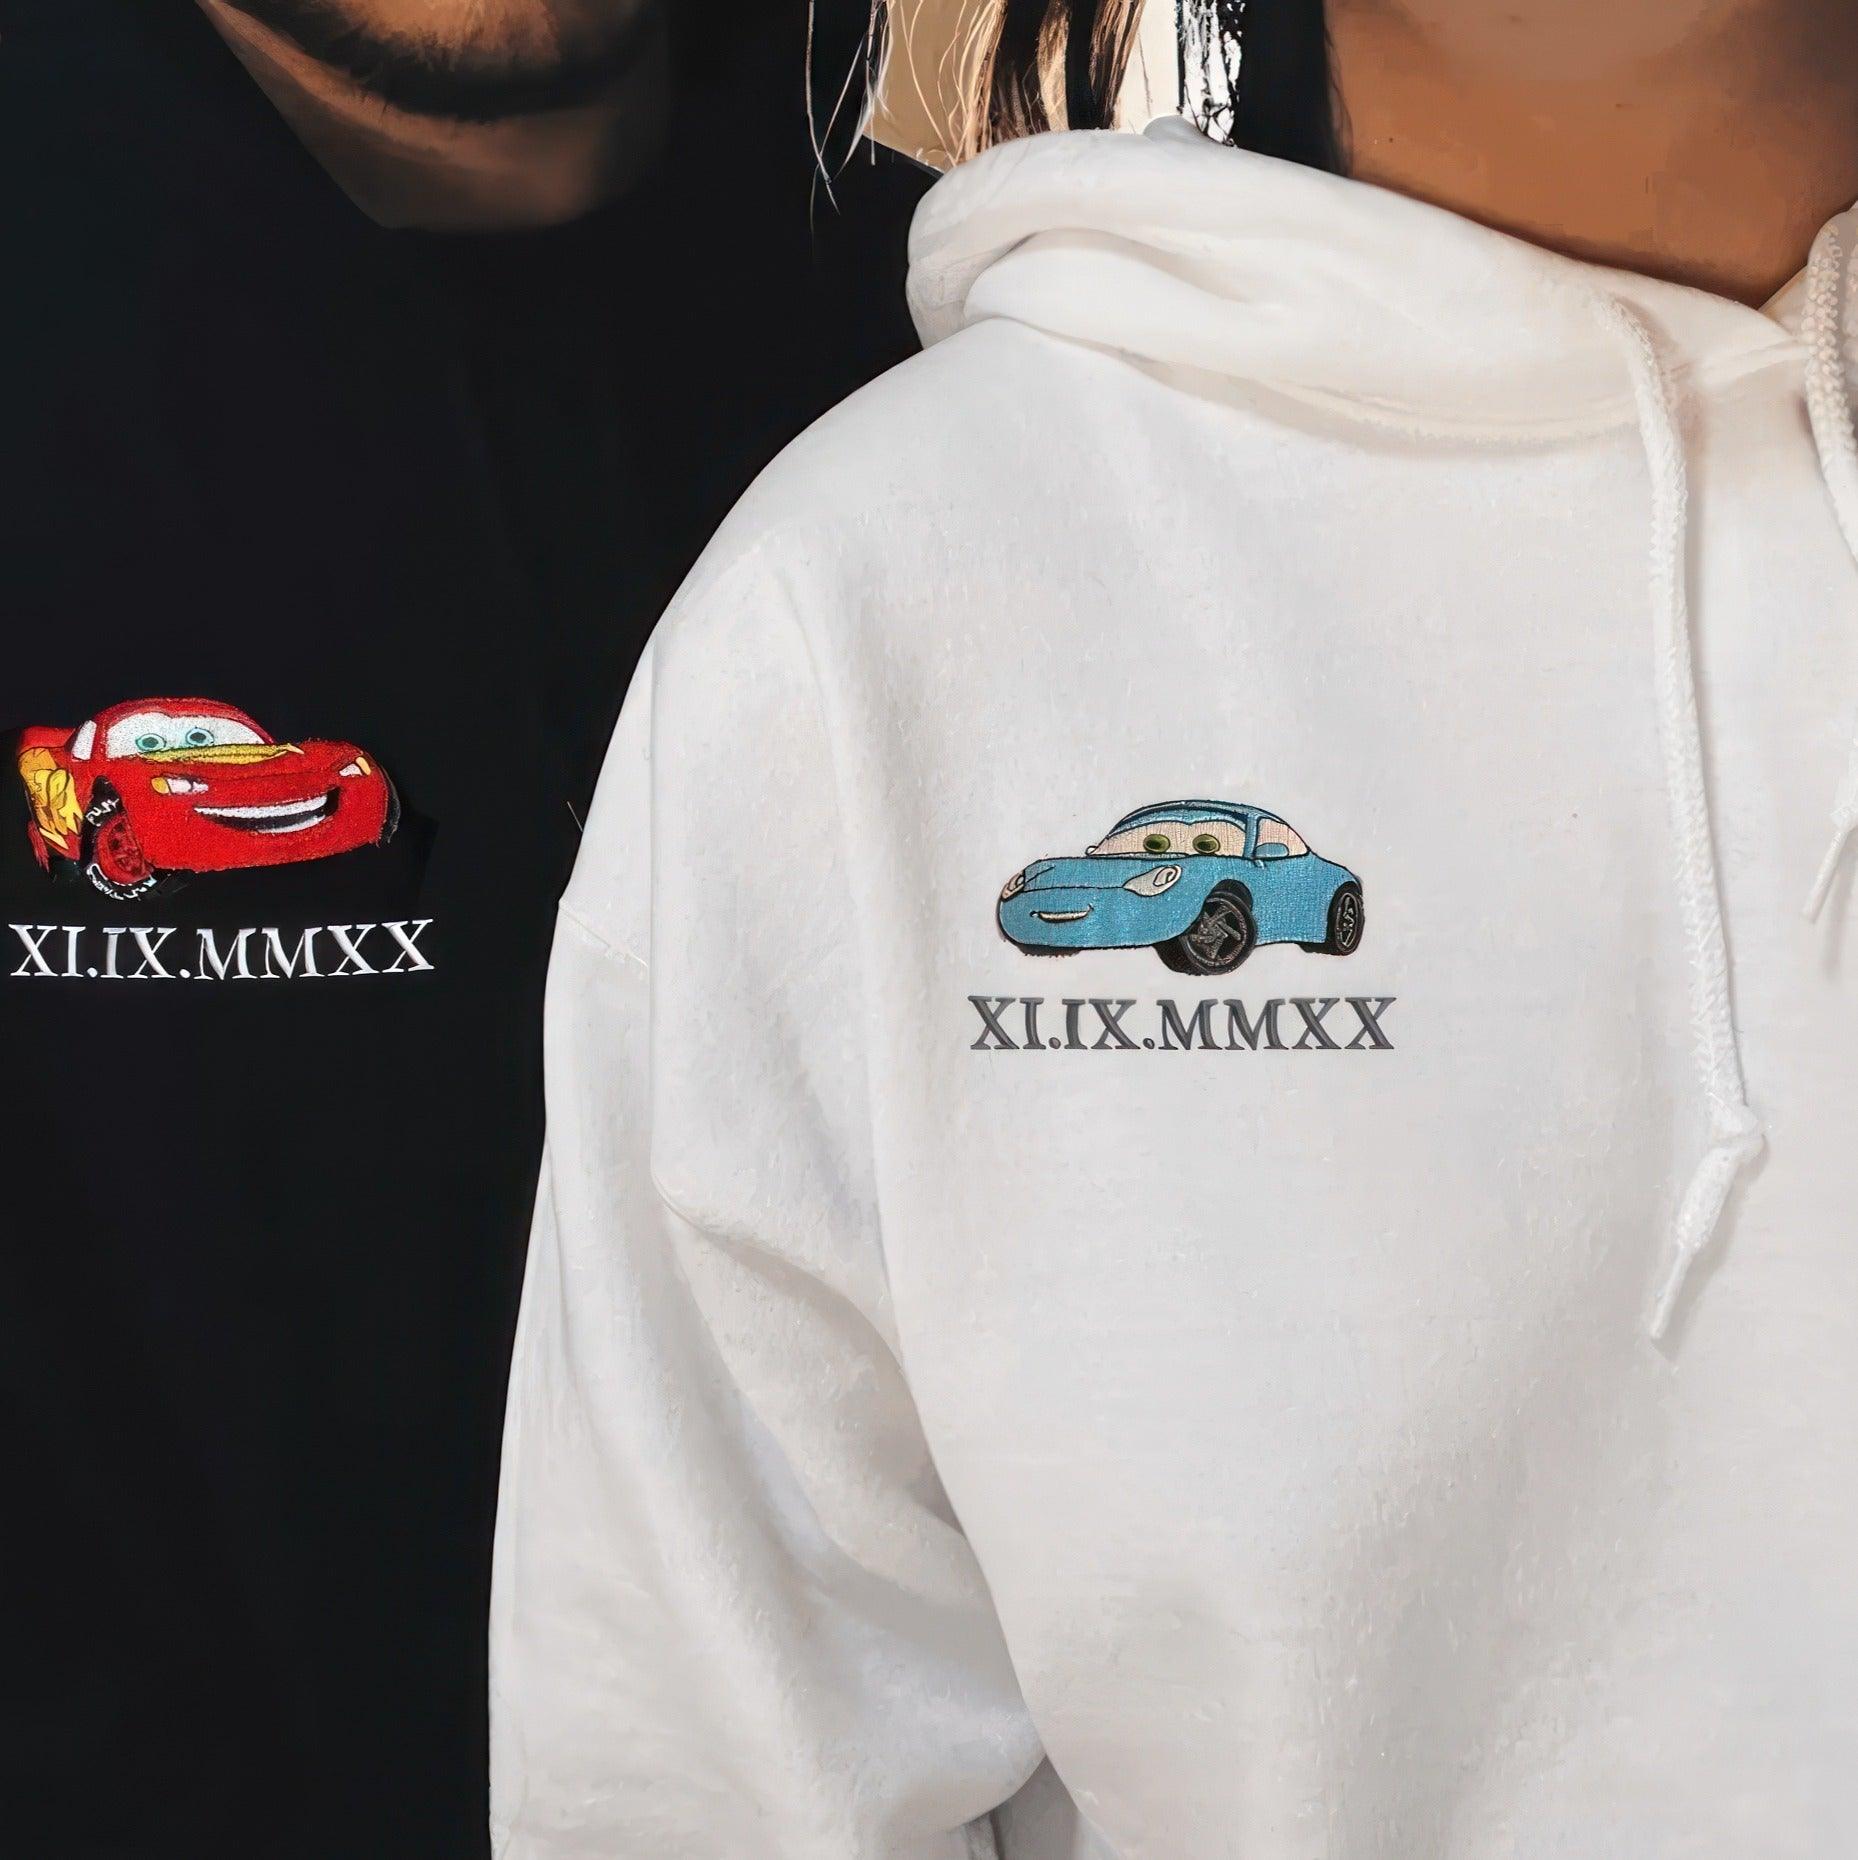 Custom Embroidered Hoodies For Couples, Matching Couple Hoodies, Cartoon Car Couple Characters Embroidery Sweatshirt